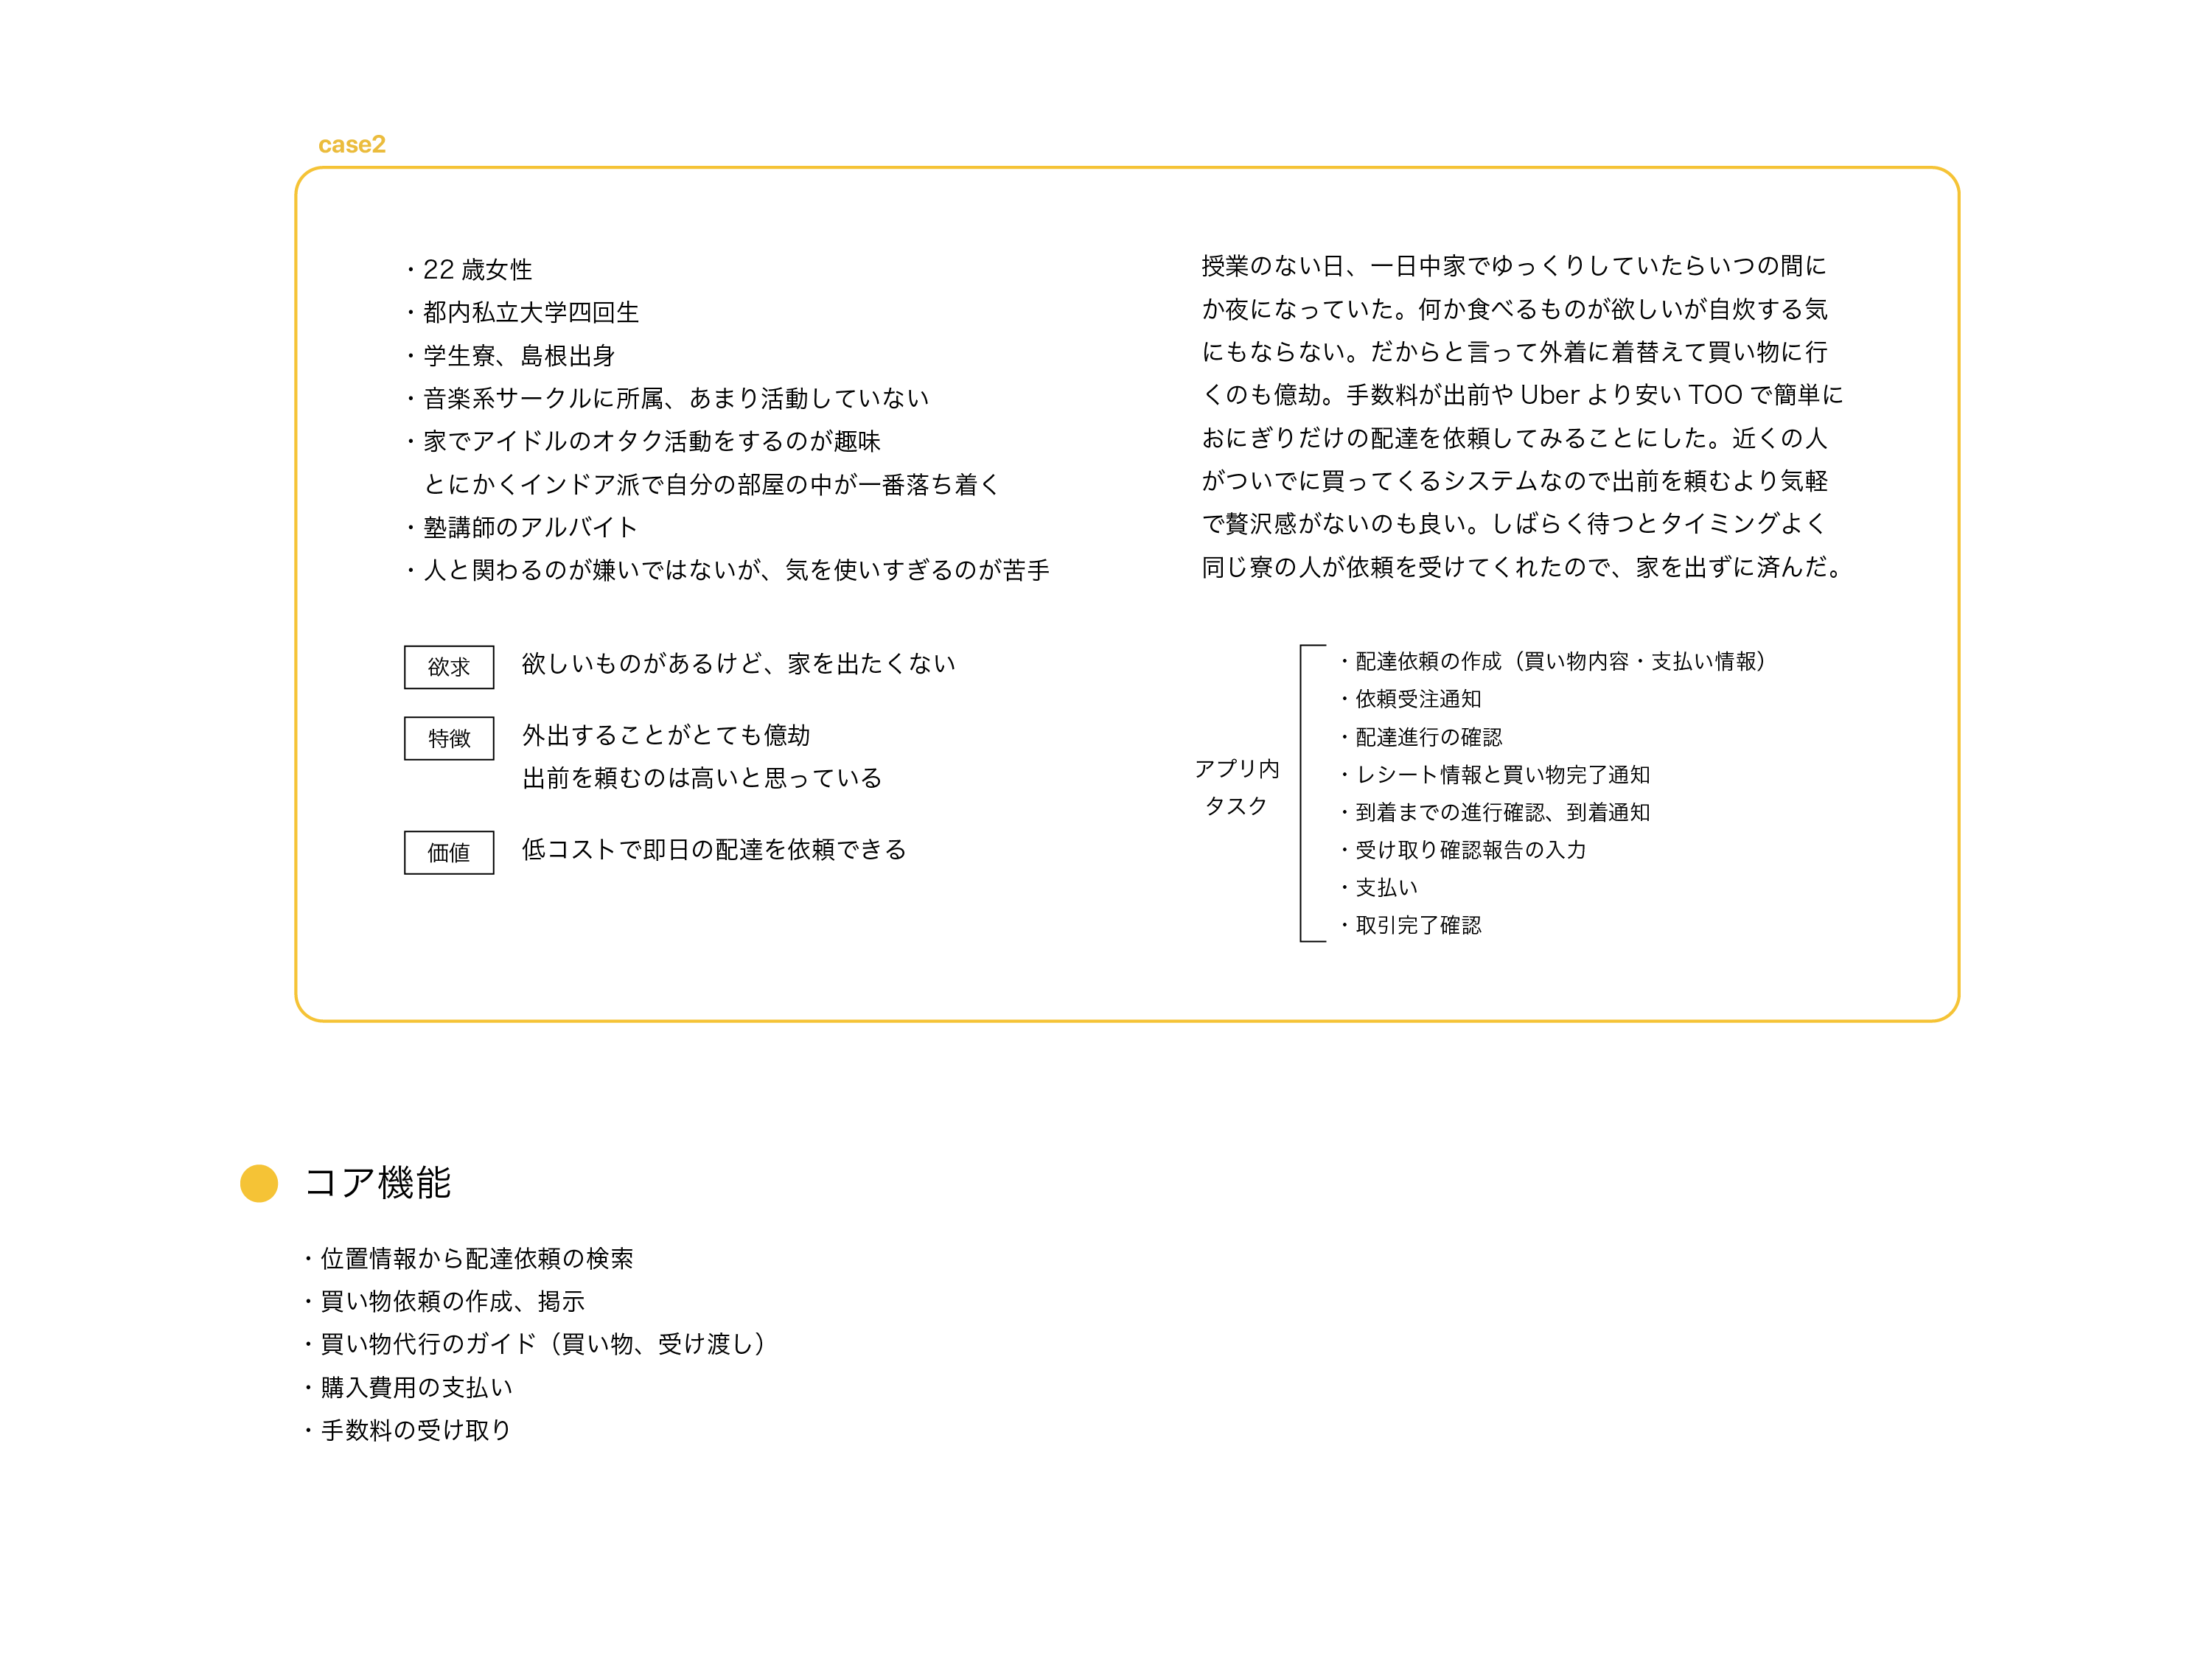 Too サービス アプリ 計画 By S N Redesigner For Student